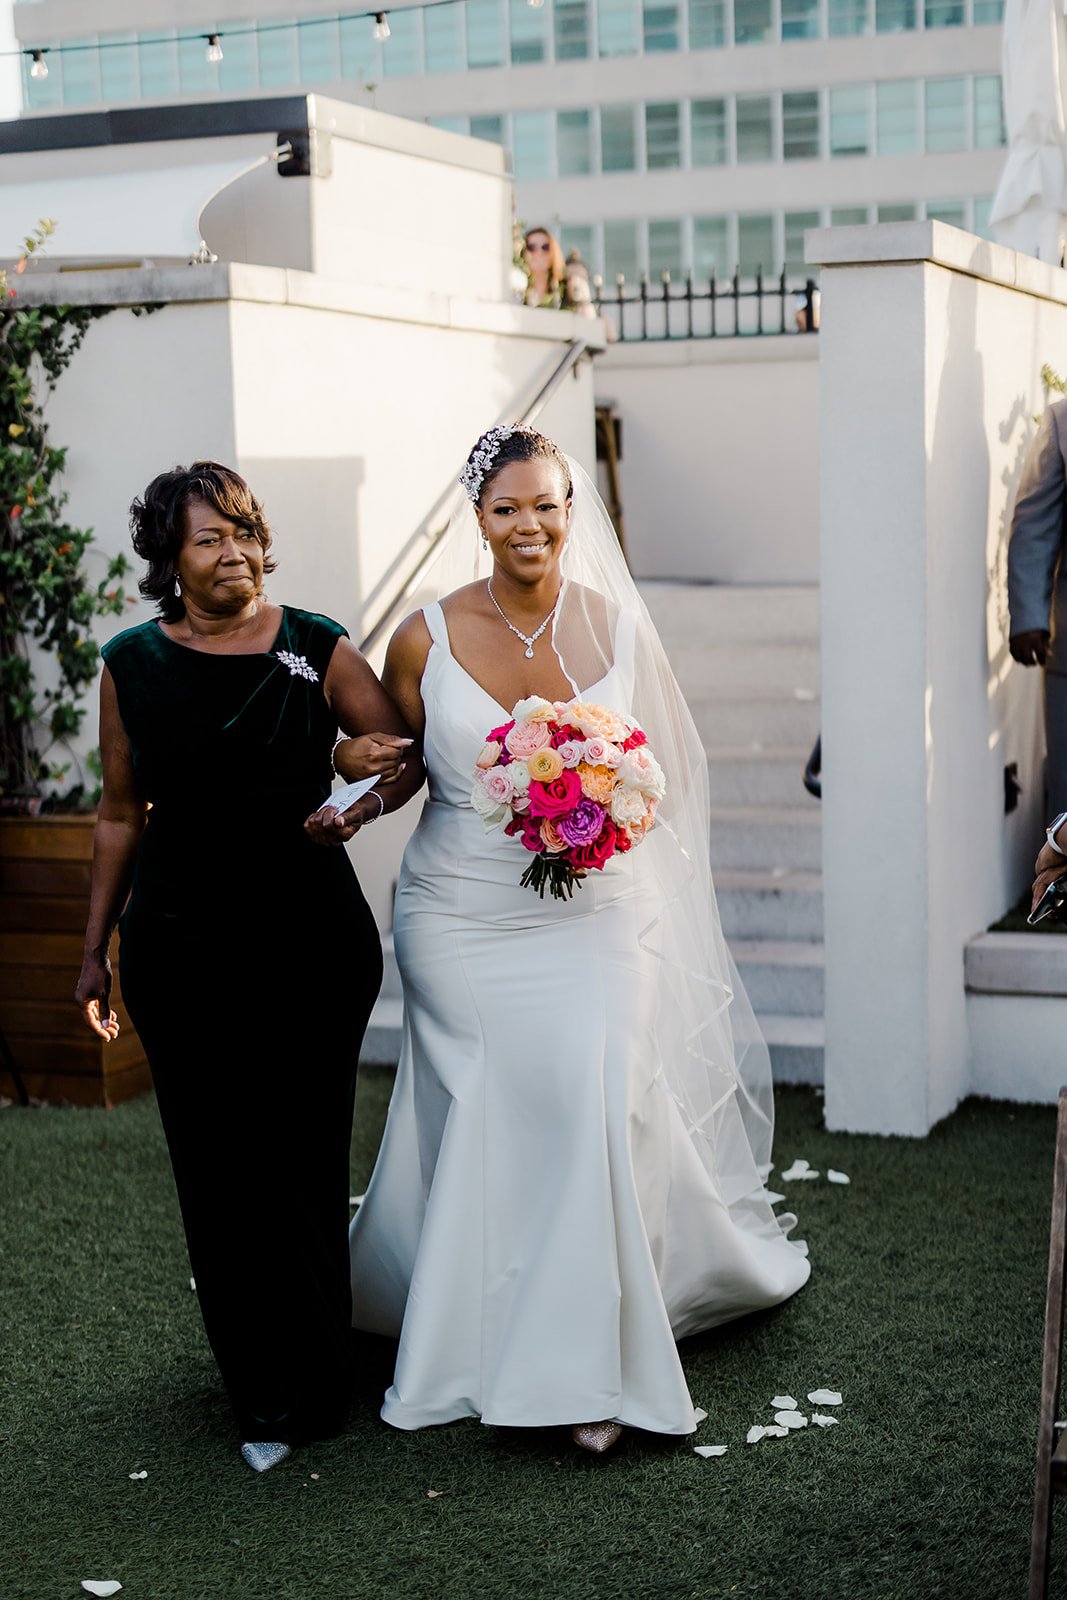  Perry Lane Hotel Wedding - Esther Griffin Photography 